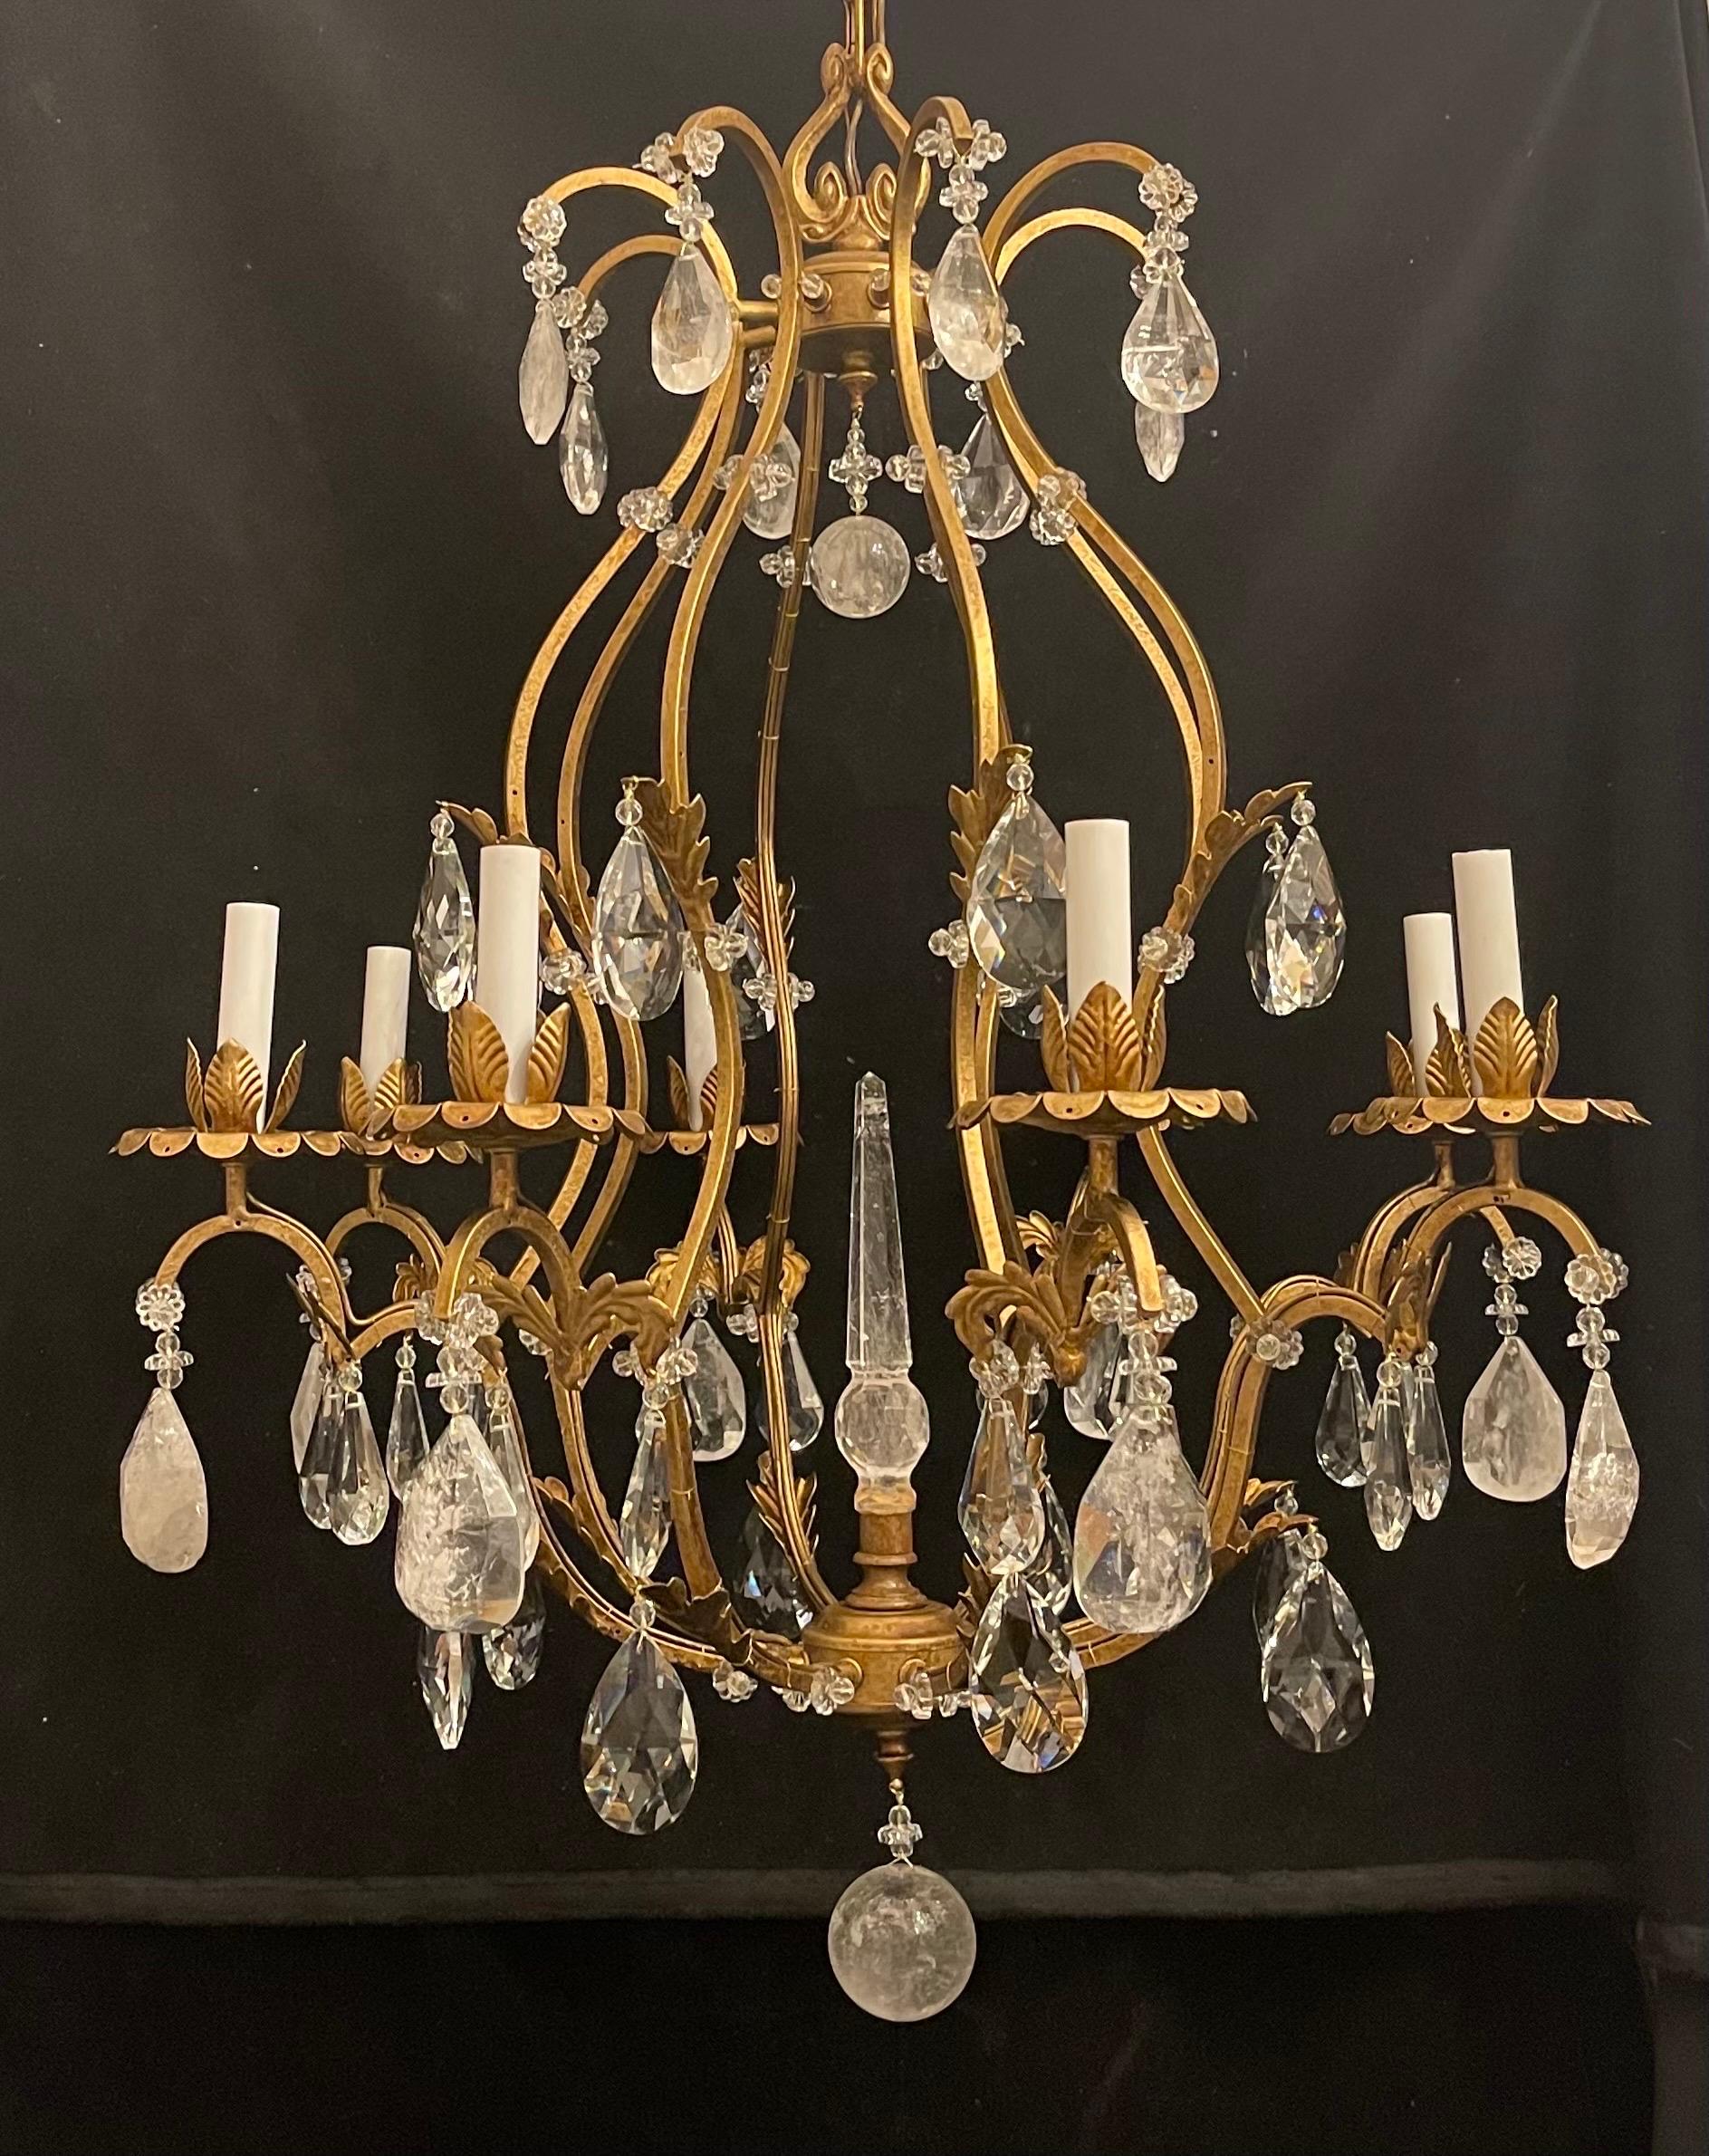 A Magnificent Maison Baguès style French rock crystal gold gilt bird cage form 8 candelabra light chandelier with rock crystal center piece spike and two rock crystal balls.
Rewired with UL and comes with chain canopy and mounting hardware for